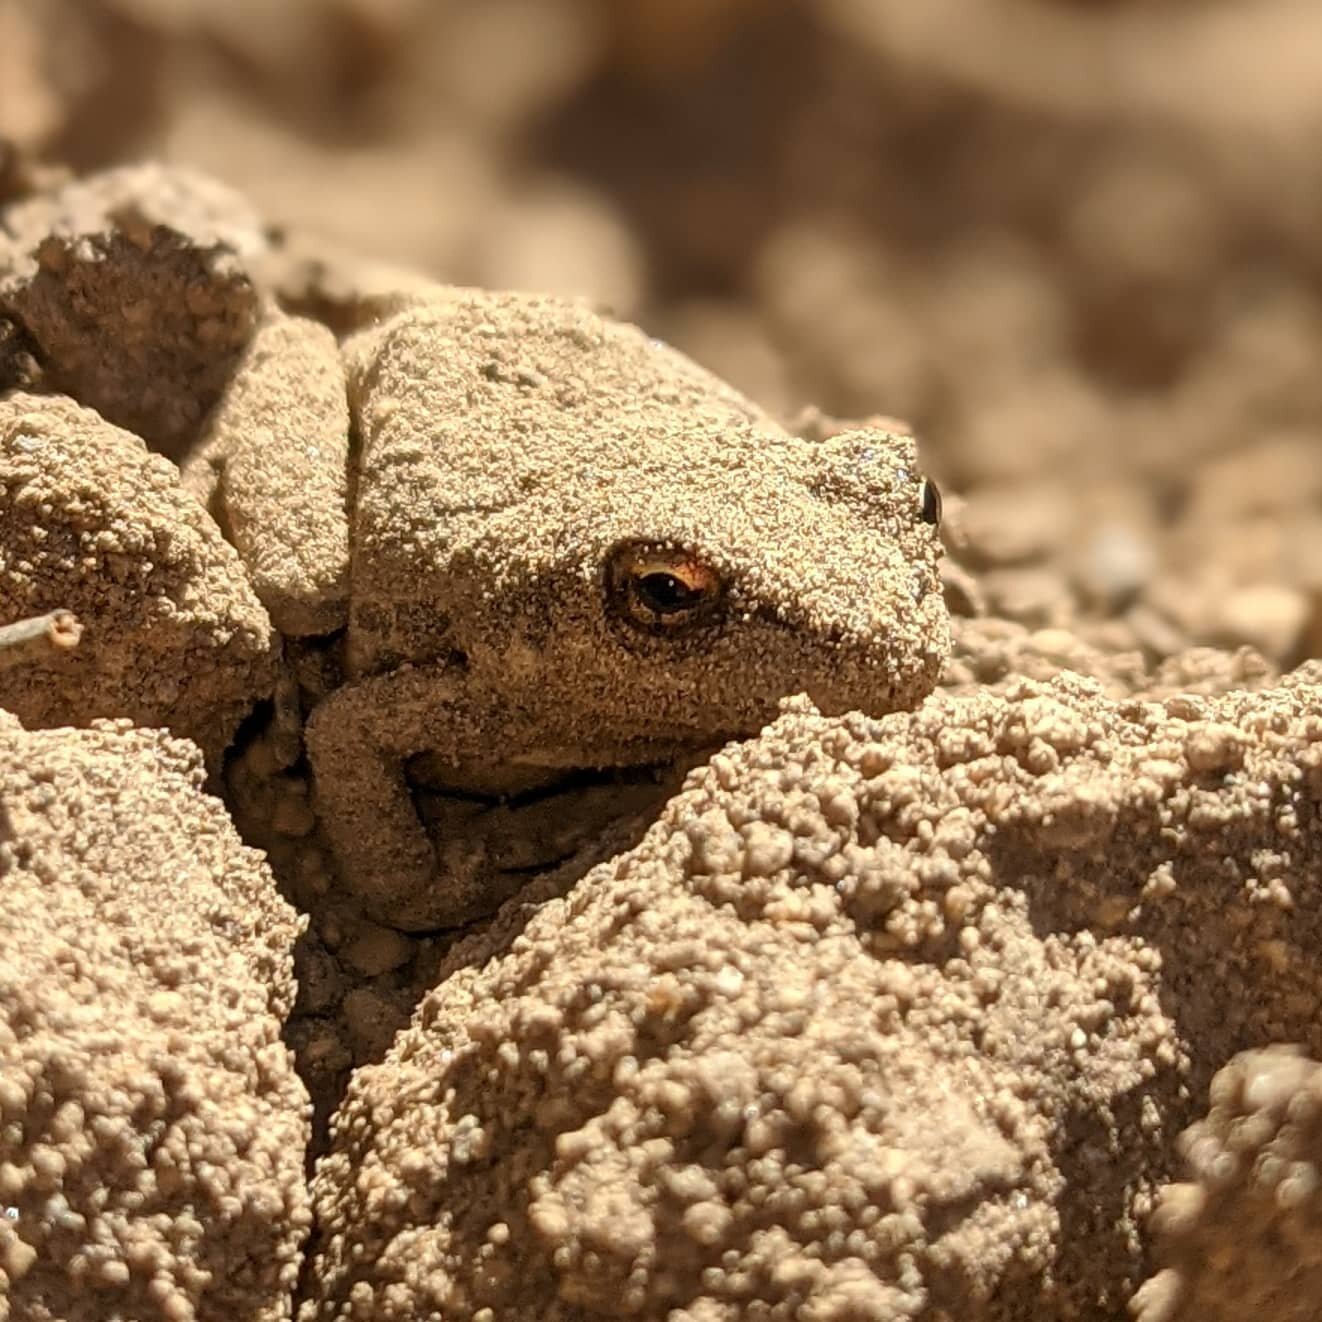 I feel like that dirt clod is staring at me... #waterwhysirrigation #waterwhys #frog #dirtclod